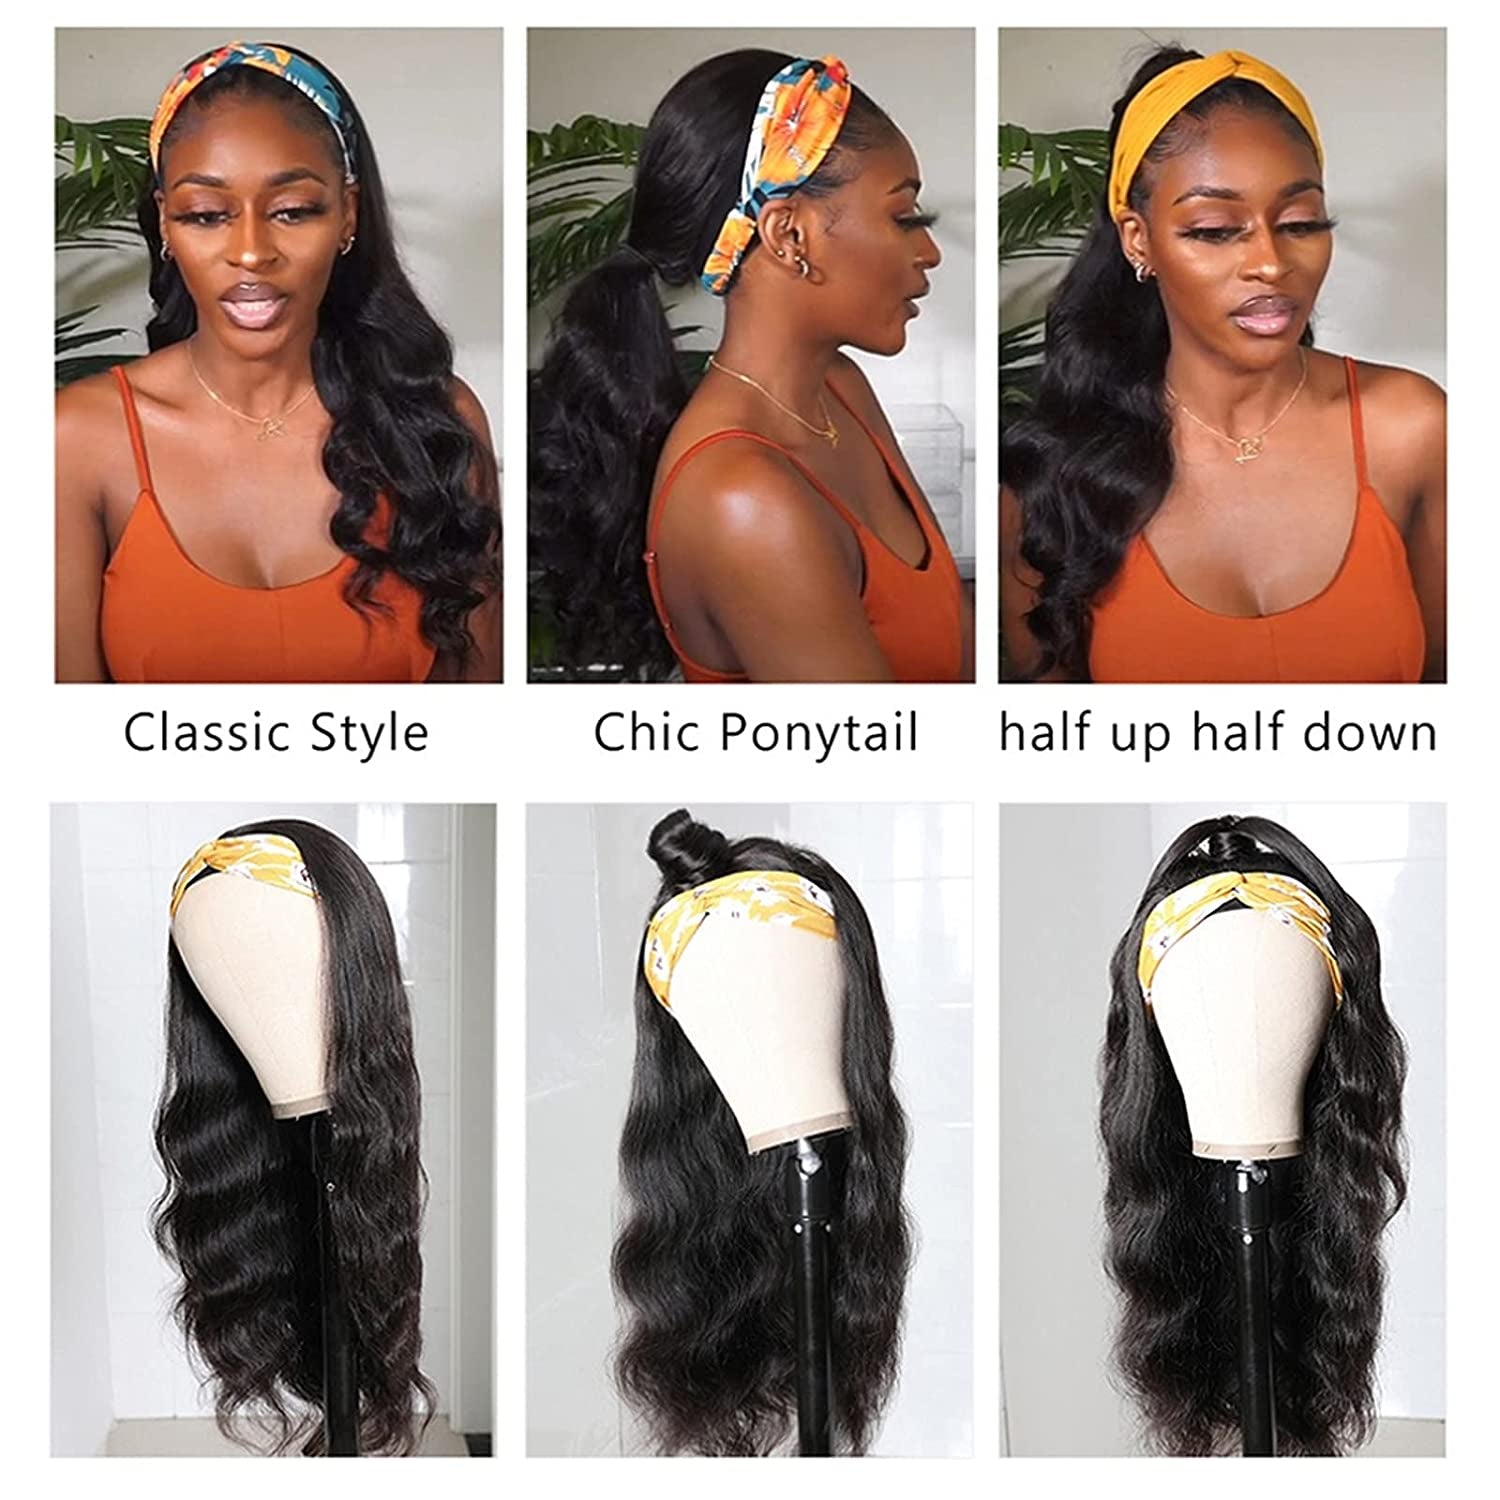 Wholesale elastic bands for wigs For Your Hair Styling Needs 